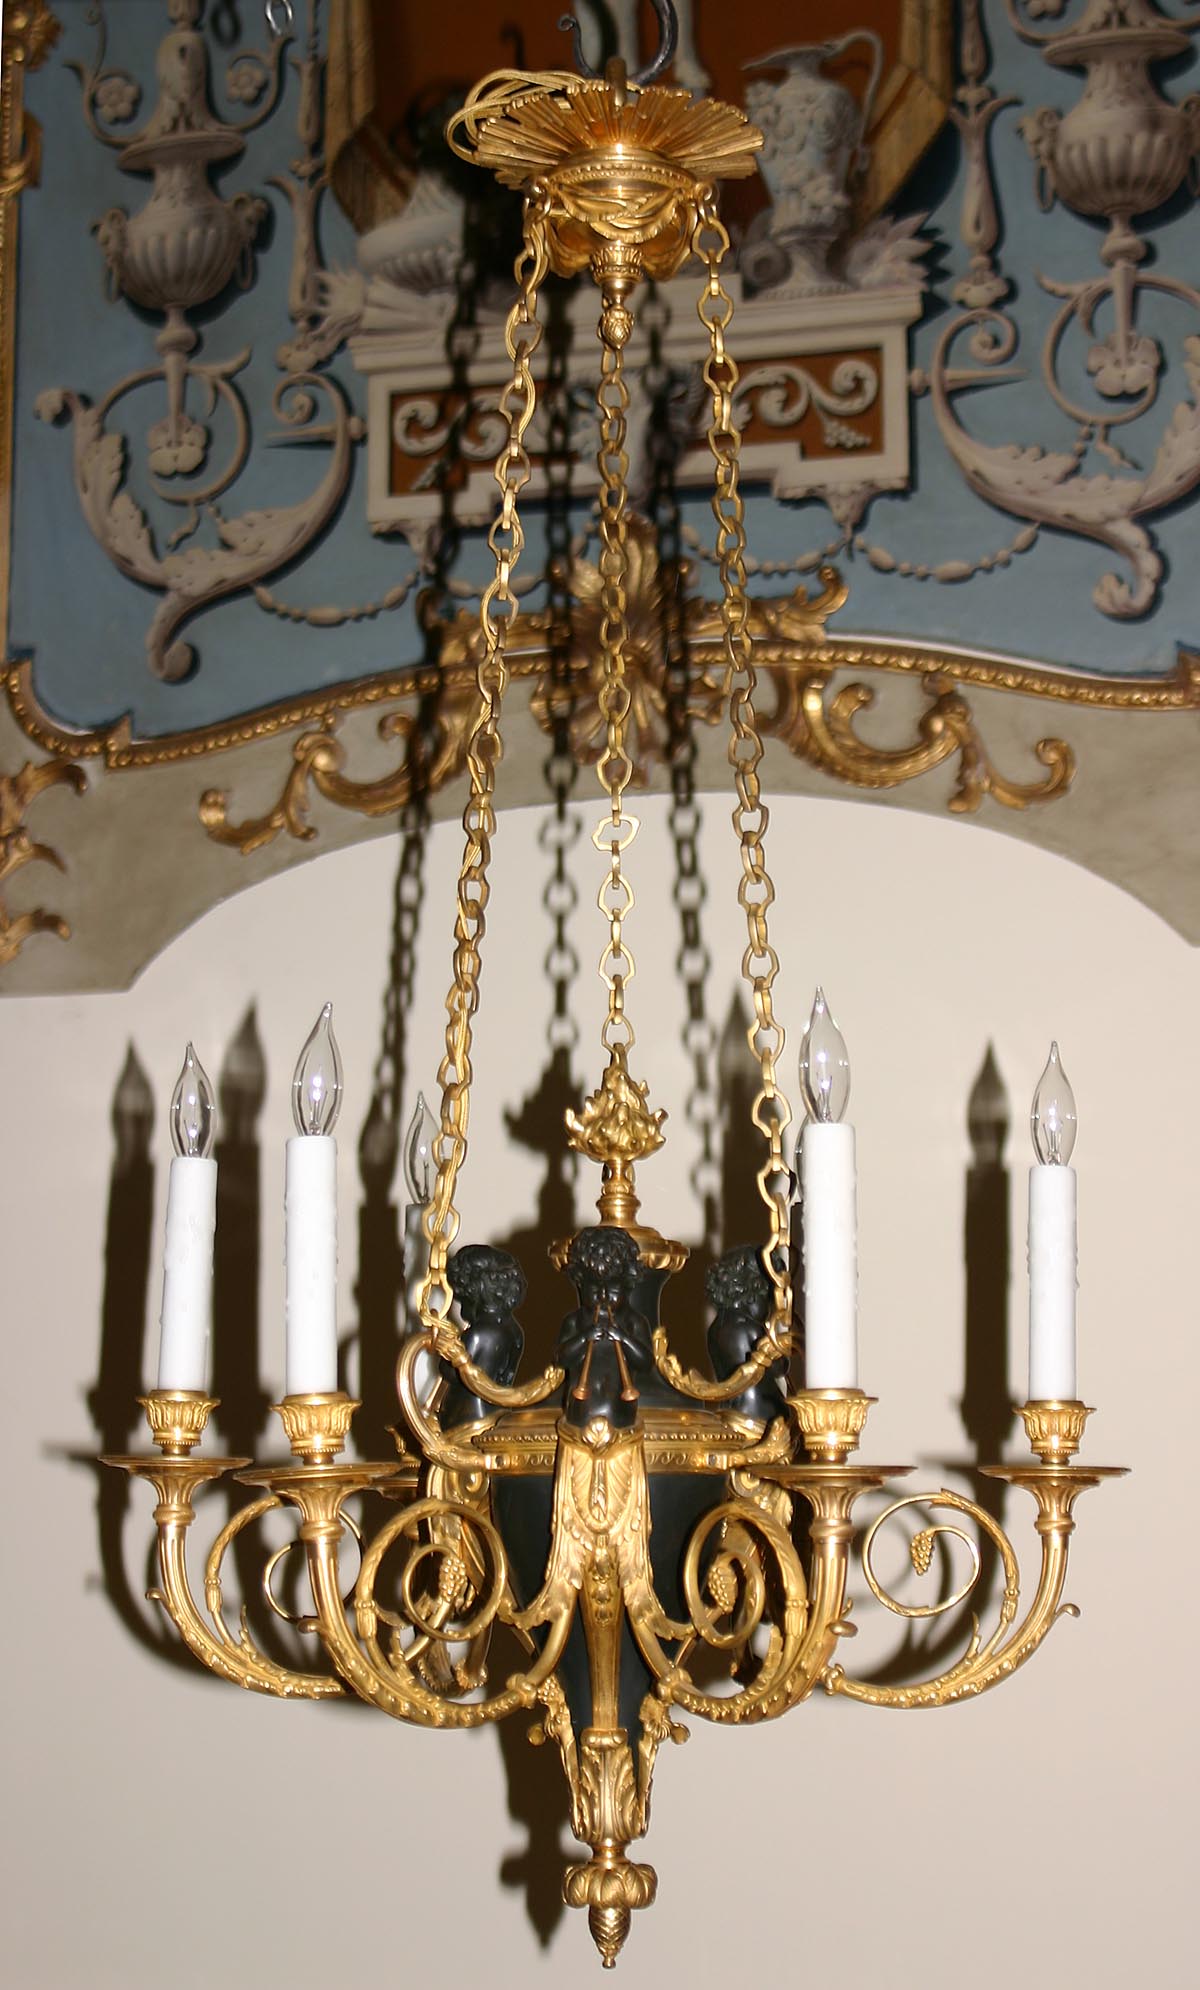 Very fine, French, Neo-classical style, bronze d'ore and patinated bronze, six-light chandelier